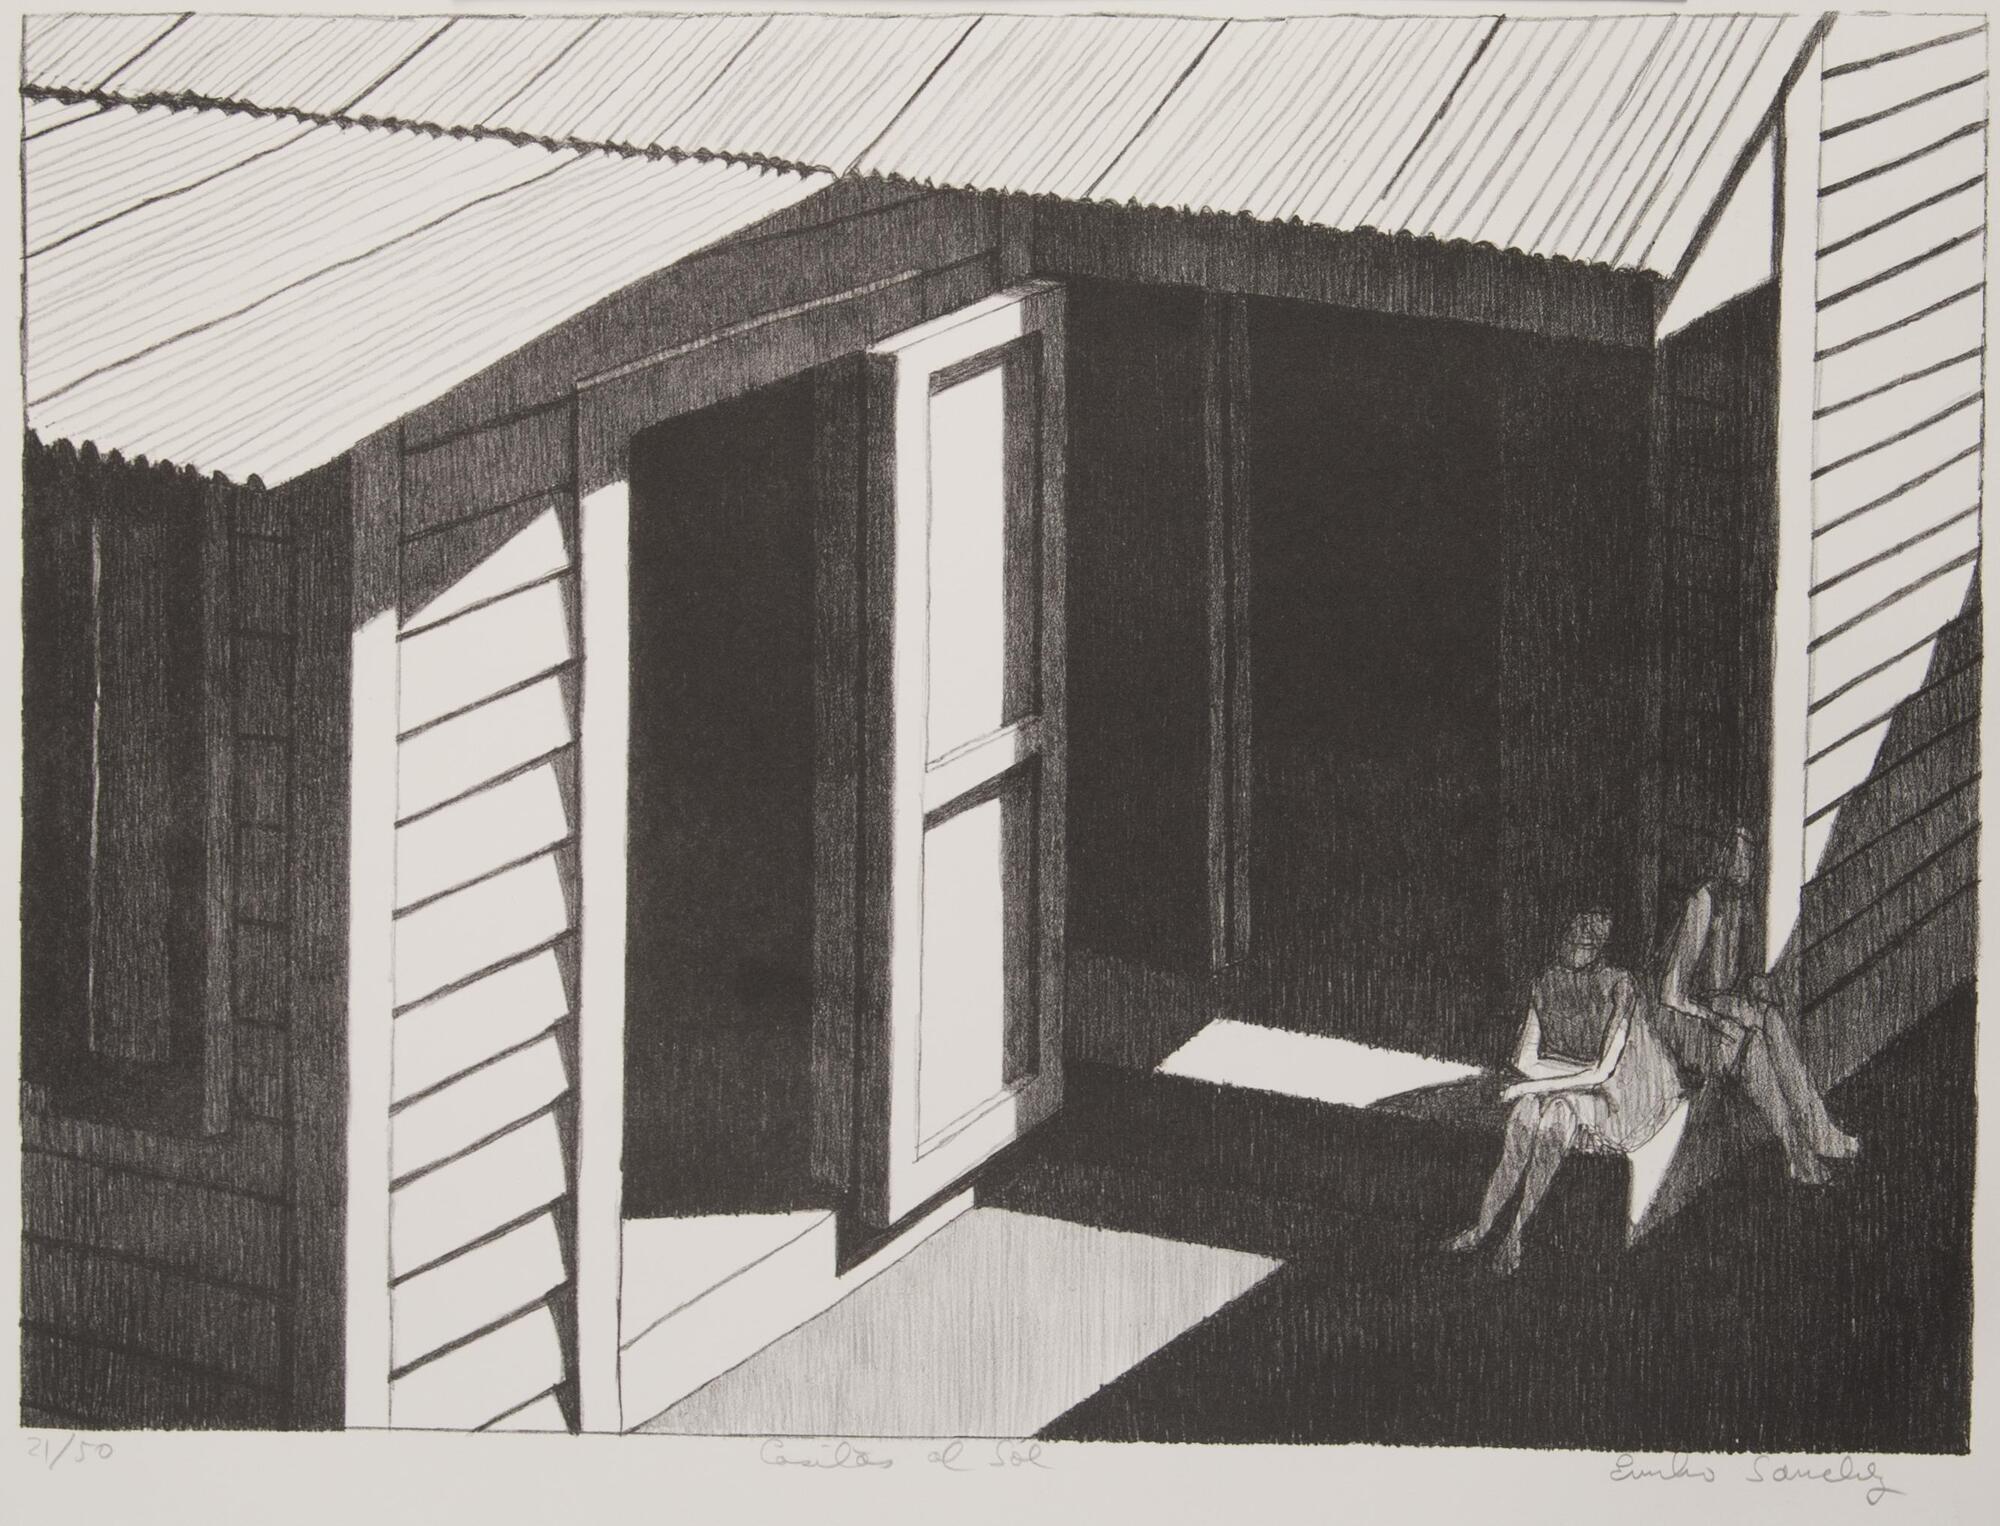 A high-angled view of a house with two women sitting on its stoop.  In the frame the house has an inverted corner, putting the women in the shadows of the larger portion of the home.